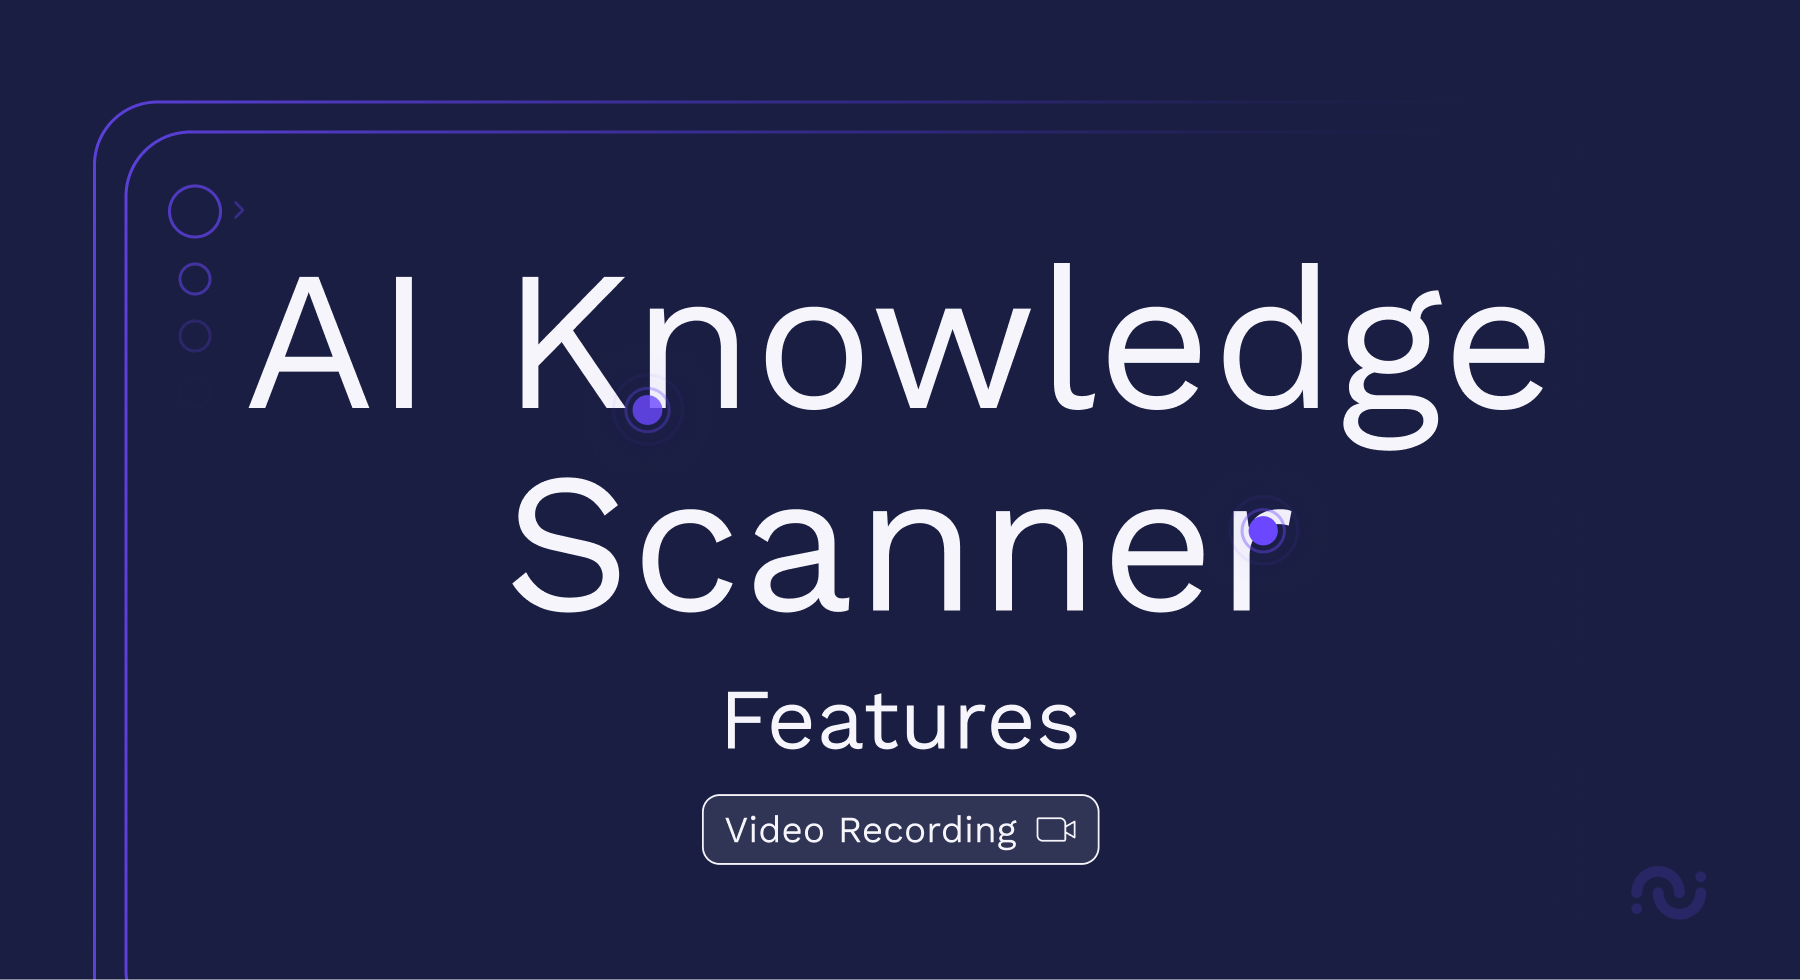 Features cover- ai knowledge scanner